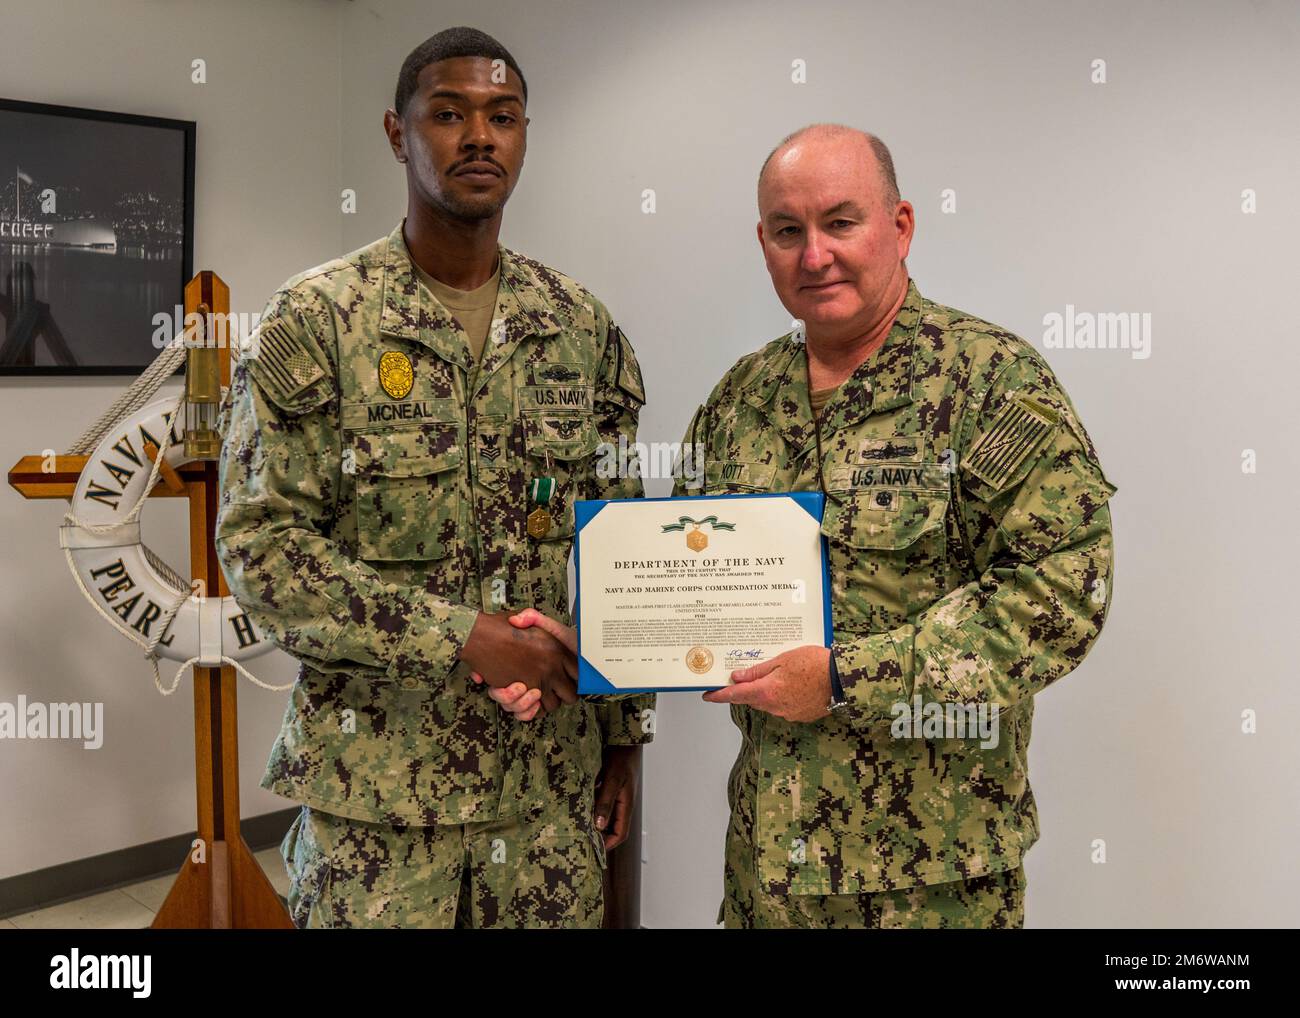 220506-N-KN989-1001 JOINT BASE PEARL HARBOR-HICKAM, Hawaii (May 6, 2022) Rear Adm. Timothy Kott, Commander, Navy Region Hawaii presents Master-at-Arms 1st Class Lamar McNeal with the Navy and Marine Corps Commendation Medal after being selected as Commander Navy Region Hawaii’s 2021 Shore Sailor of the Year. Commander Navy Region Hawaii is the regional coordinator for all shore-based naval personnel and shore activities in Hawaii - as well as the Navy’s representative to the Hawaii community. Stock Photo